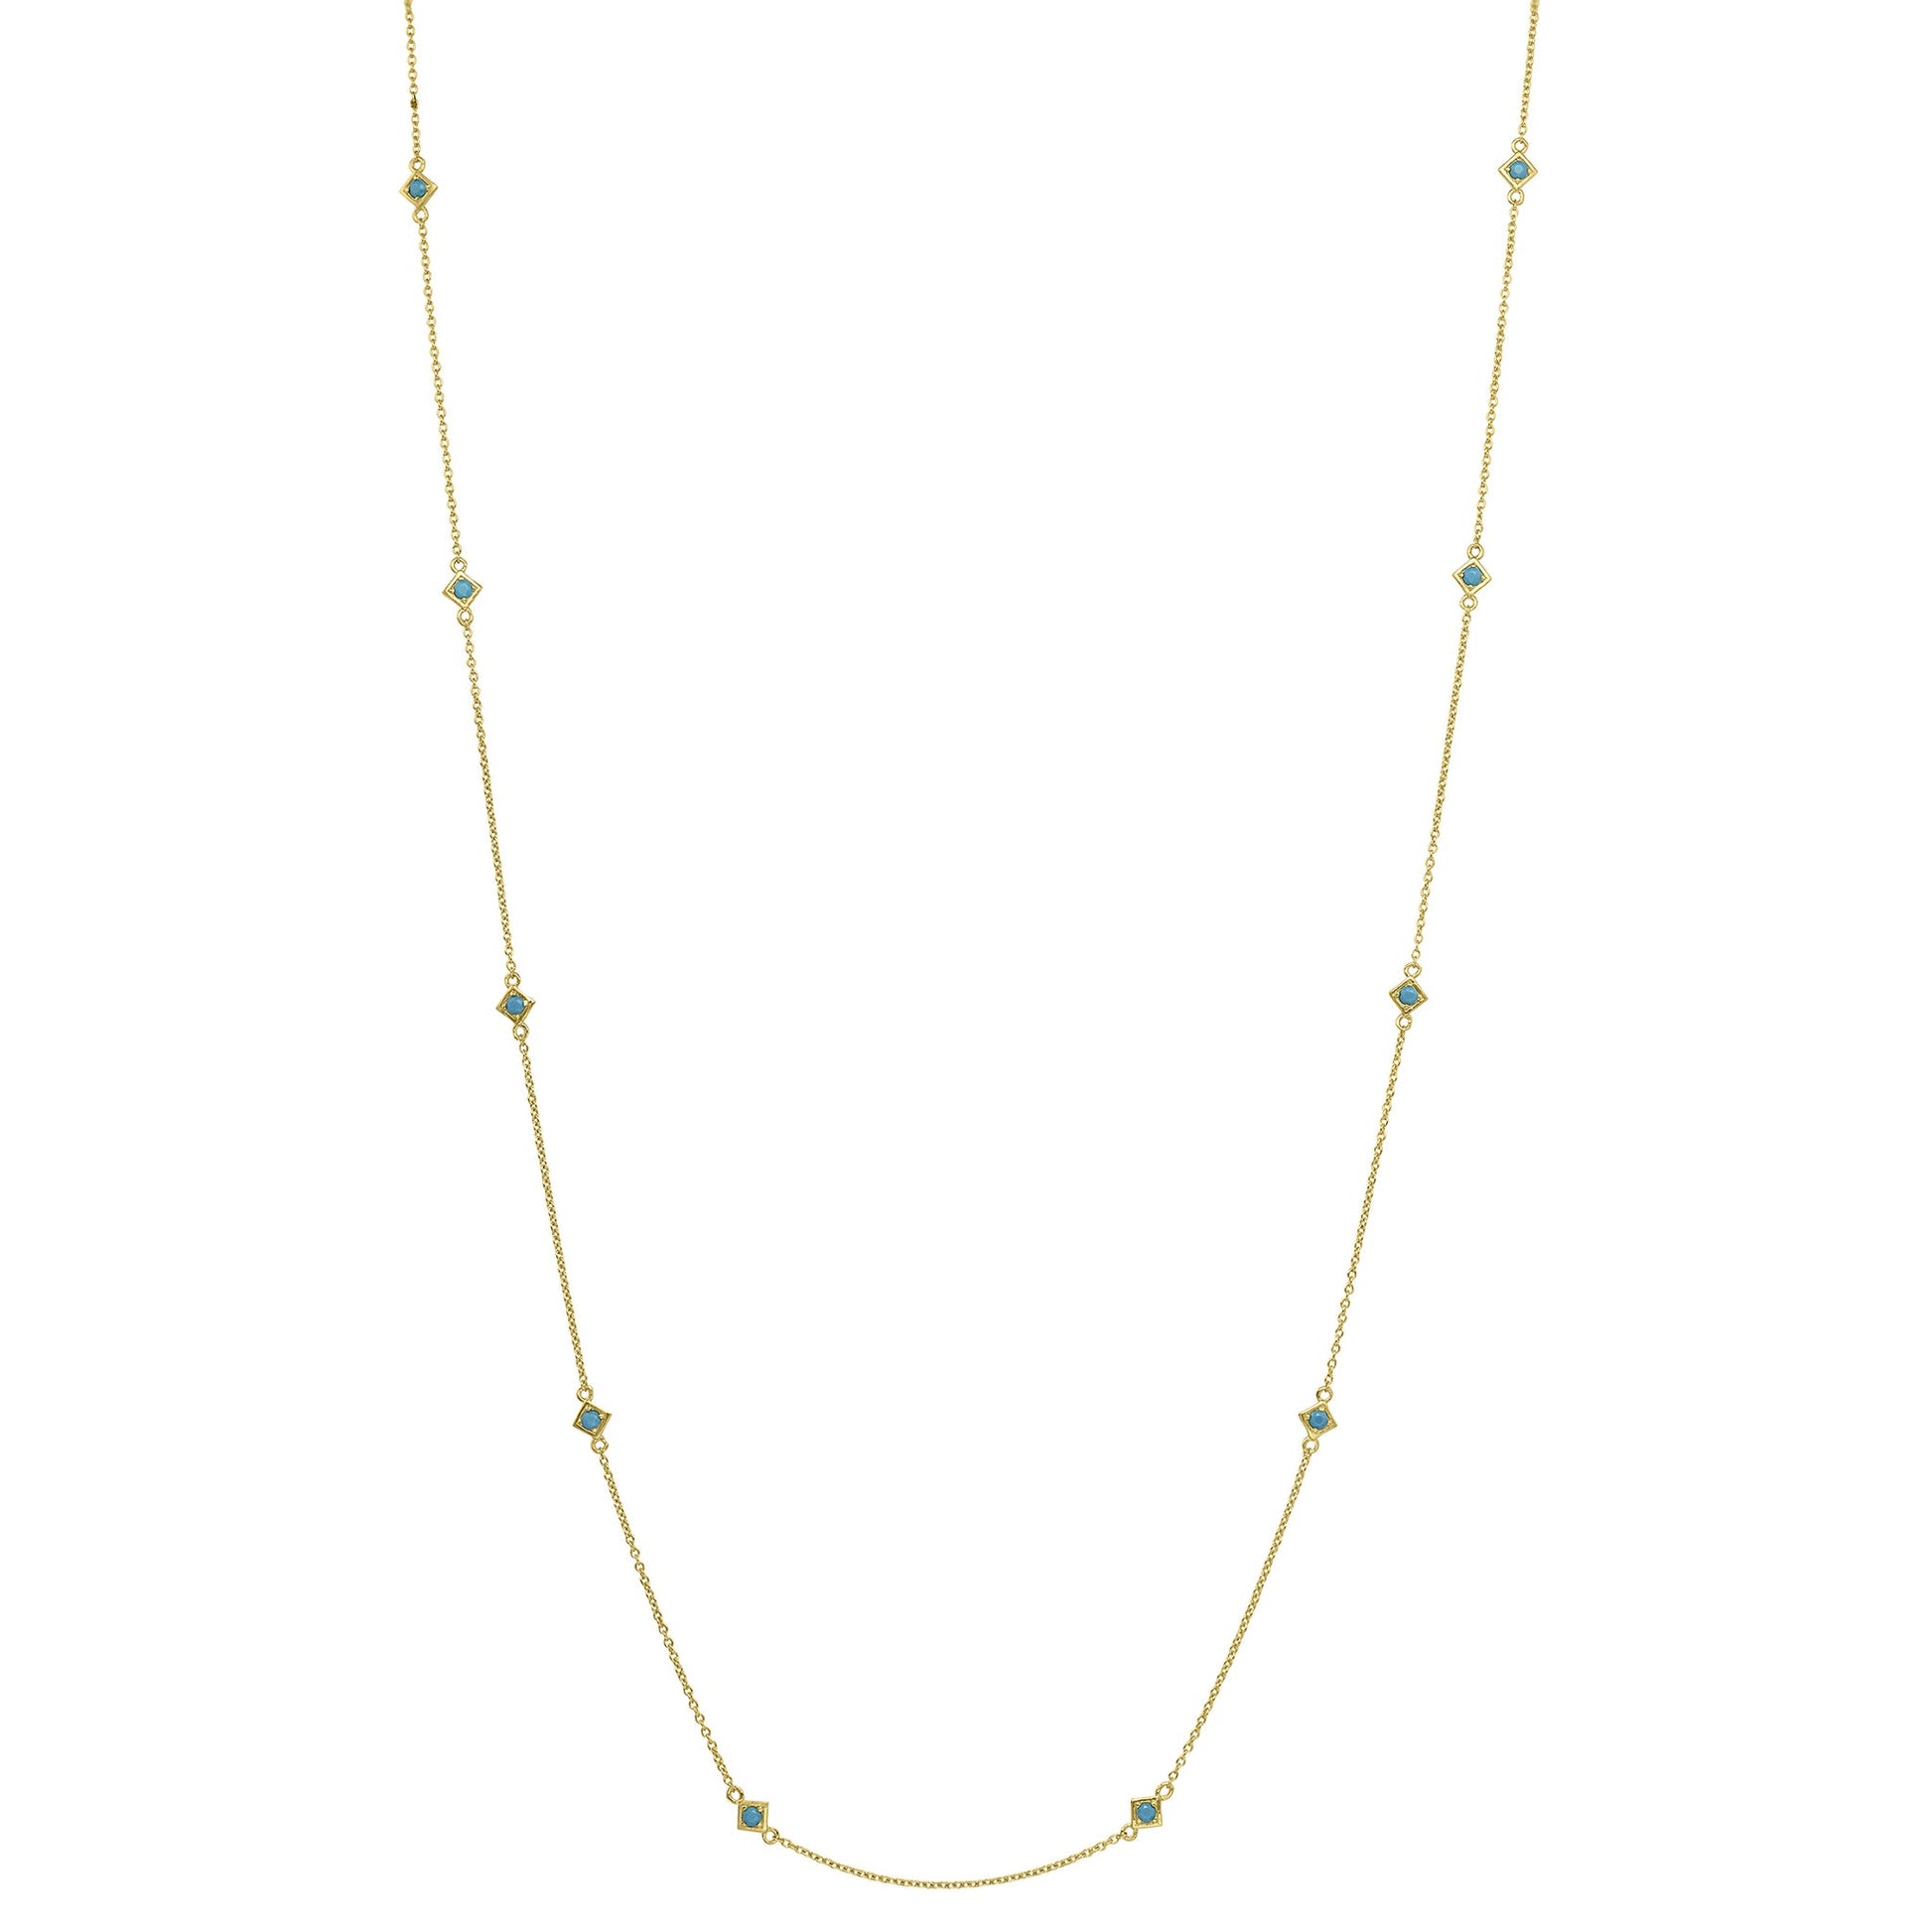 A sterling silver 60" turquoise tin cup necklace displayed on a neutral white background.